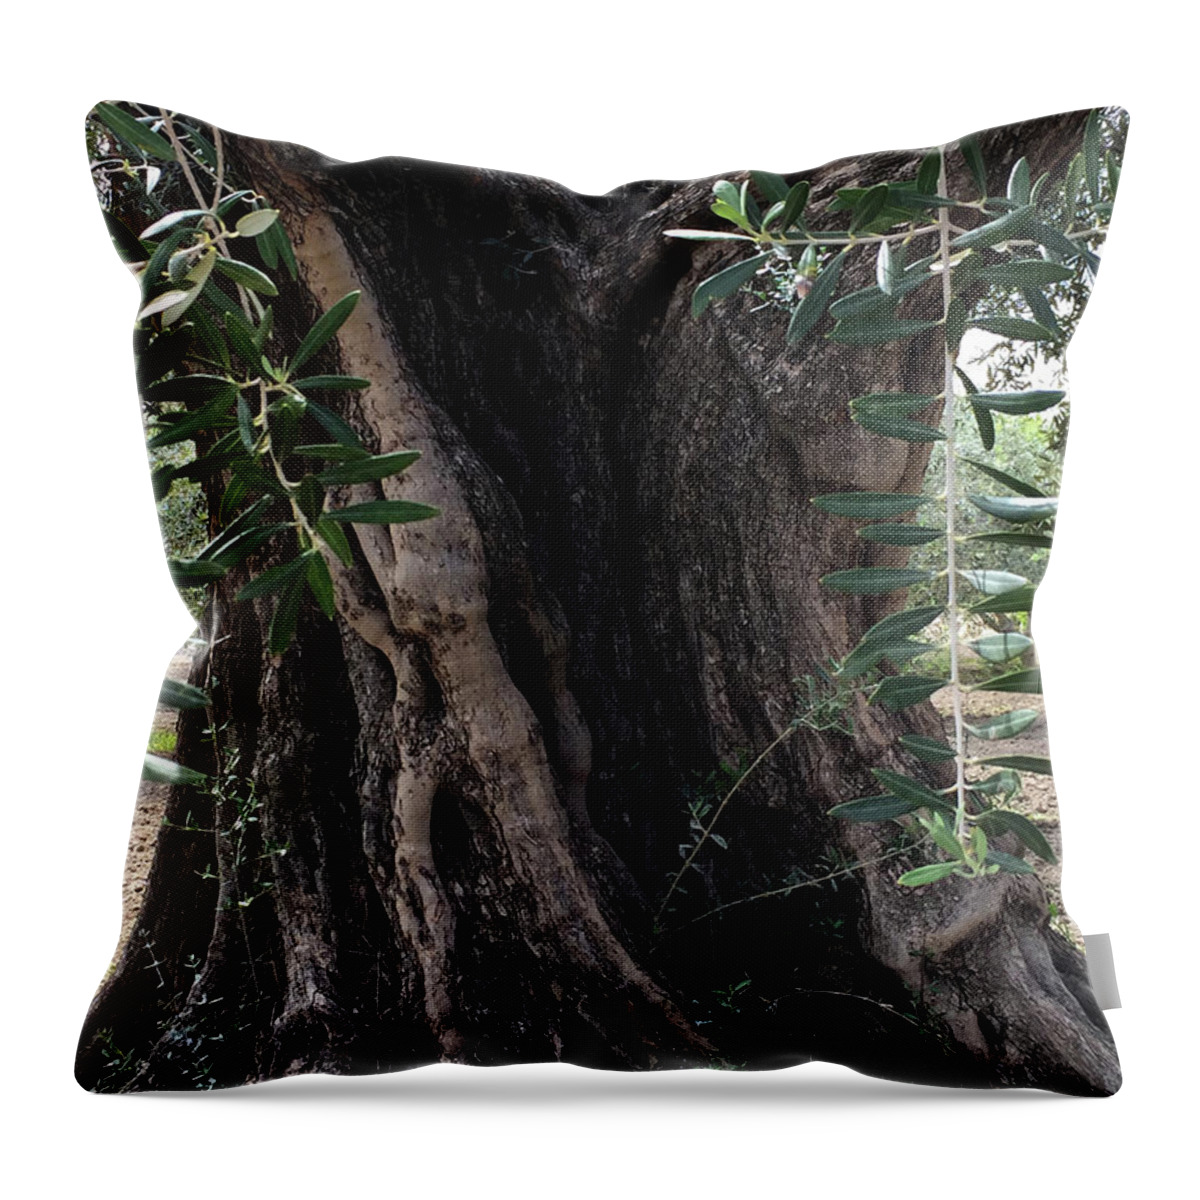 Colette Throw Pillow featuring the photograph Ancient Old Olive Tree Spain by Colette V Hera Guggenheim